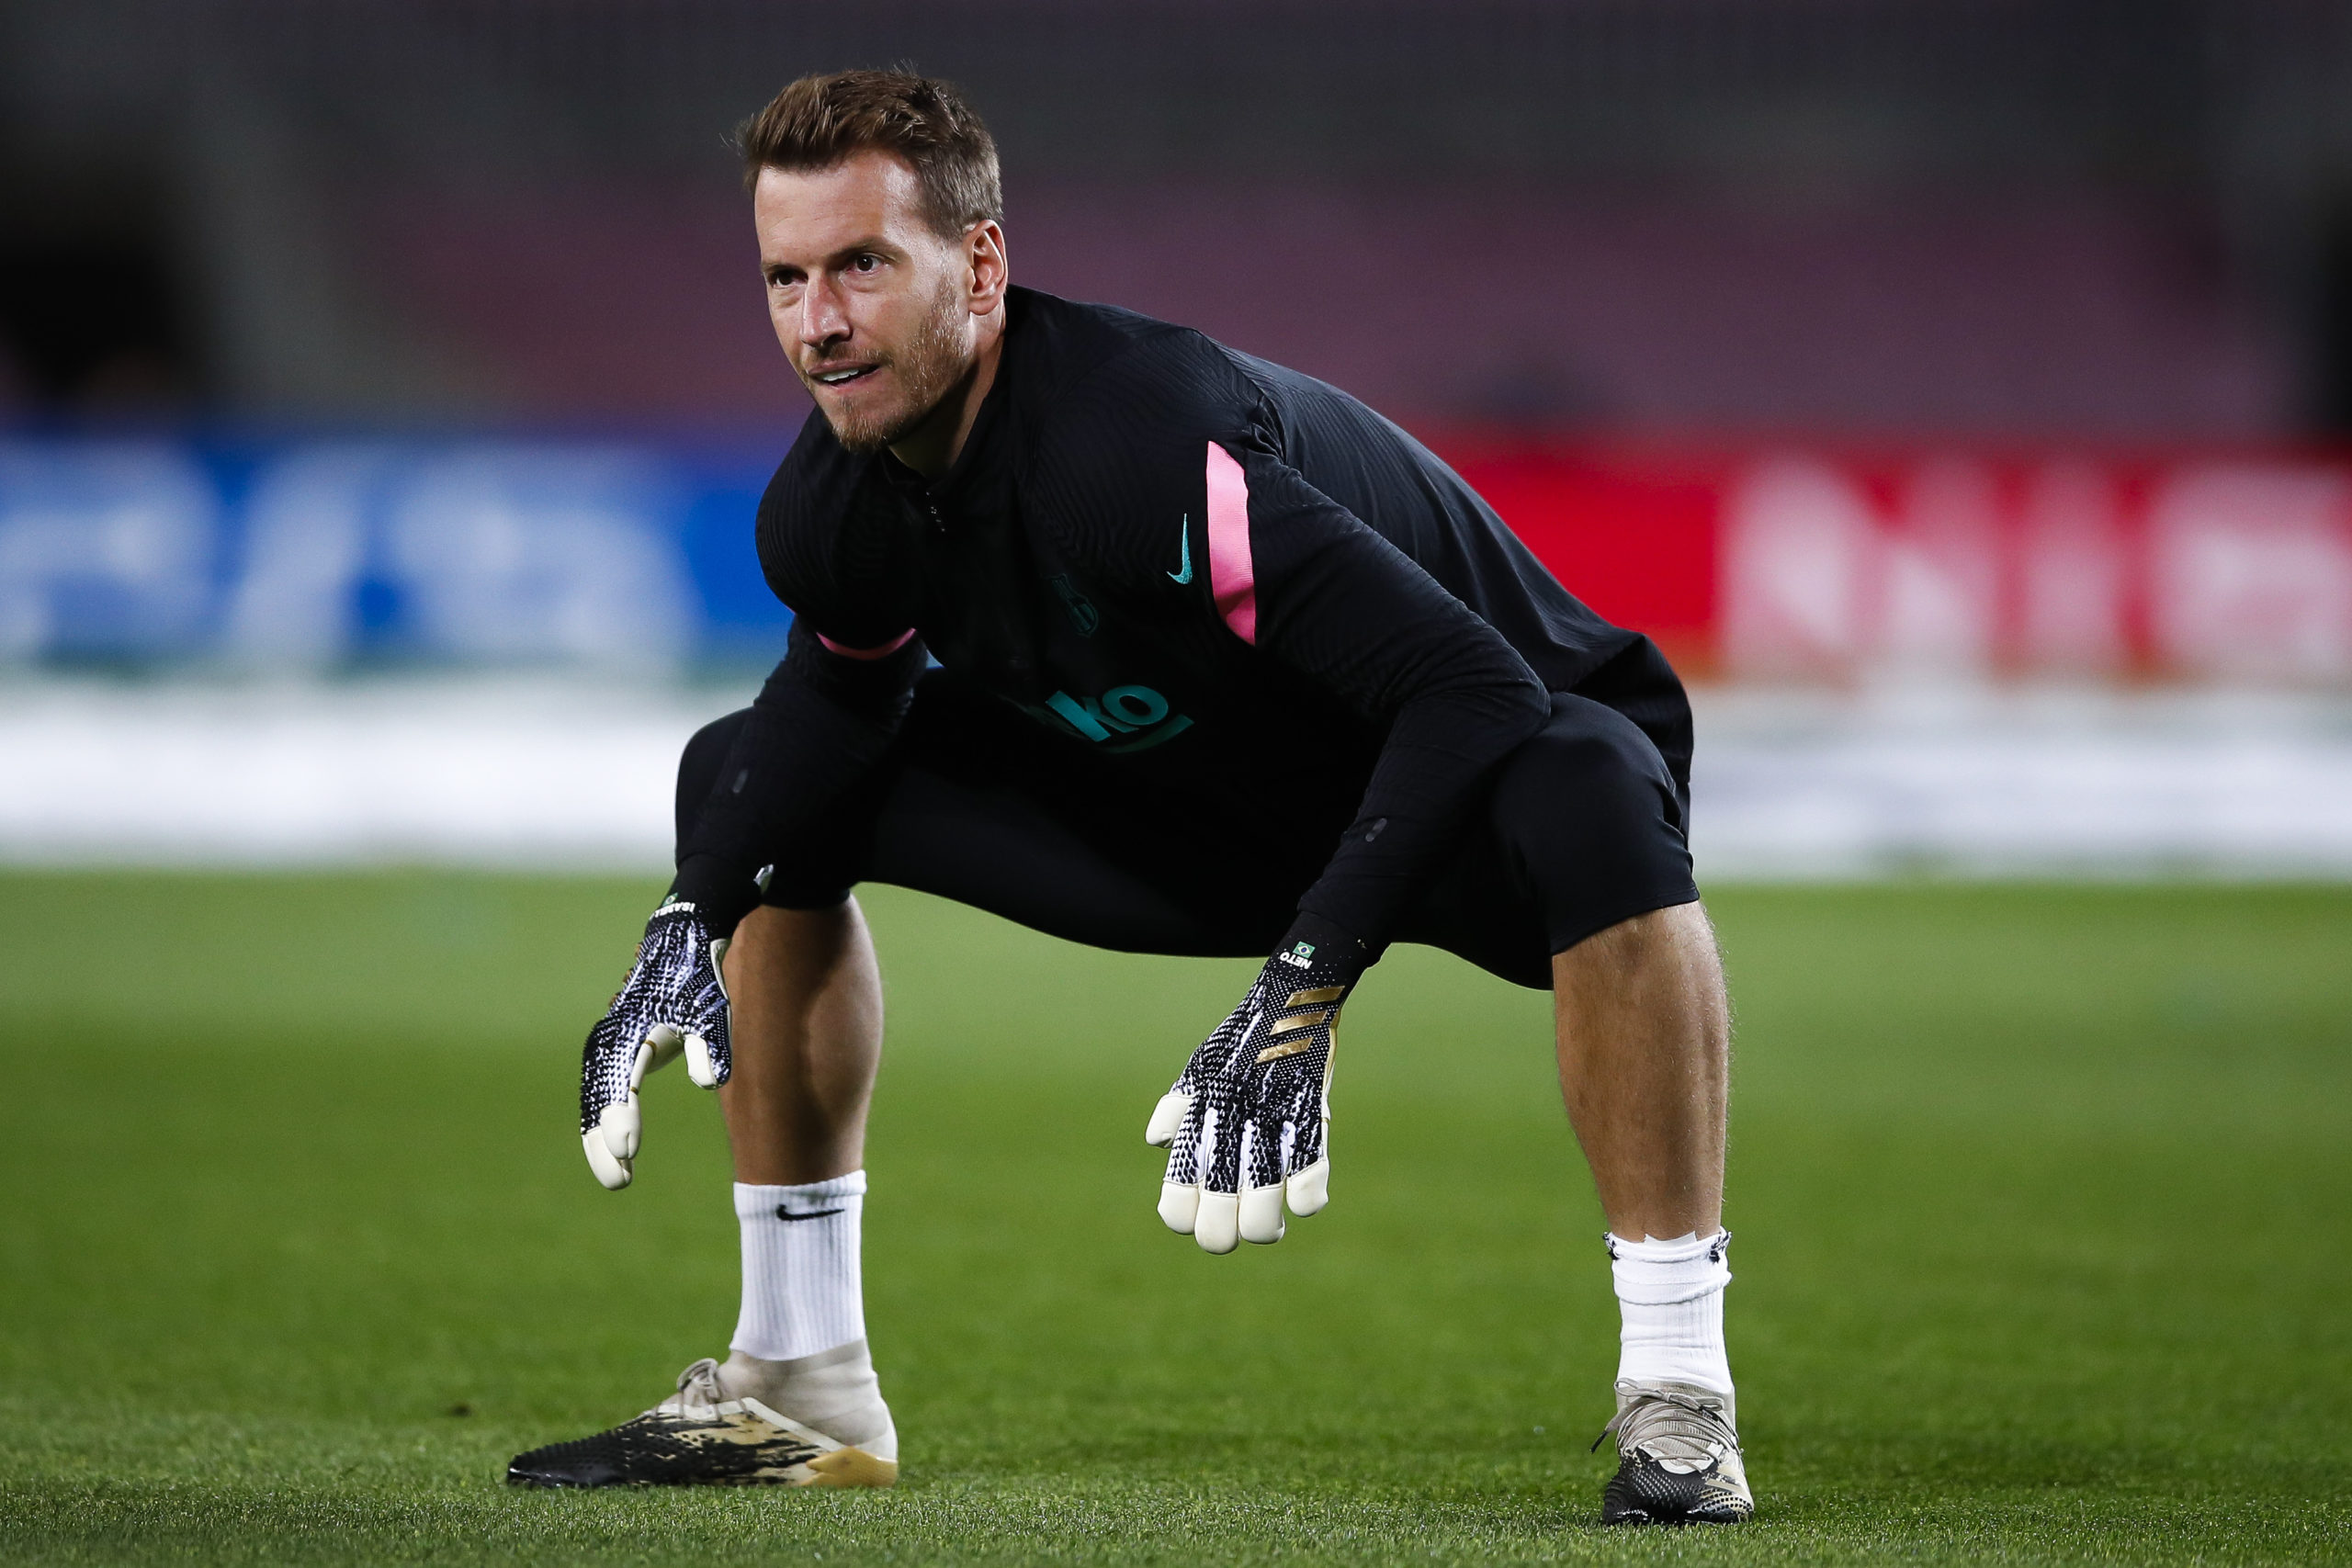 BARCELONA, SPAIN - NOVEMBER 04: Neto of FC Barcelona warms up during the UEFA Champions League Group G stage match between FC Barcelona and Dynamo Kyiv at Camp Nou on November 04, 2020 in Barcelona, Spain. (Photo by Eric Alonso/Getty Images)